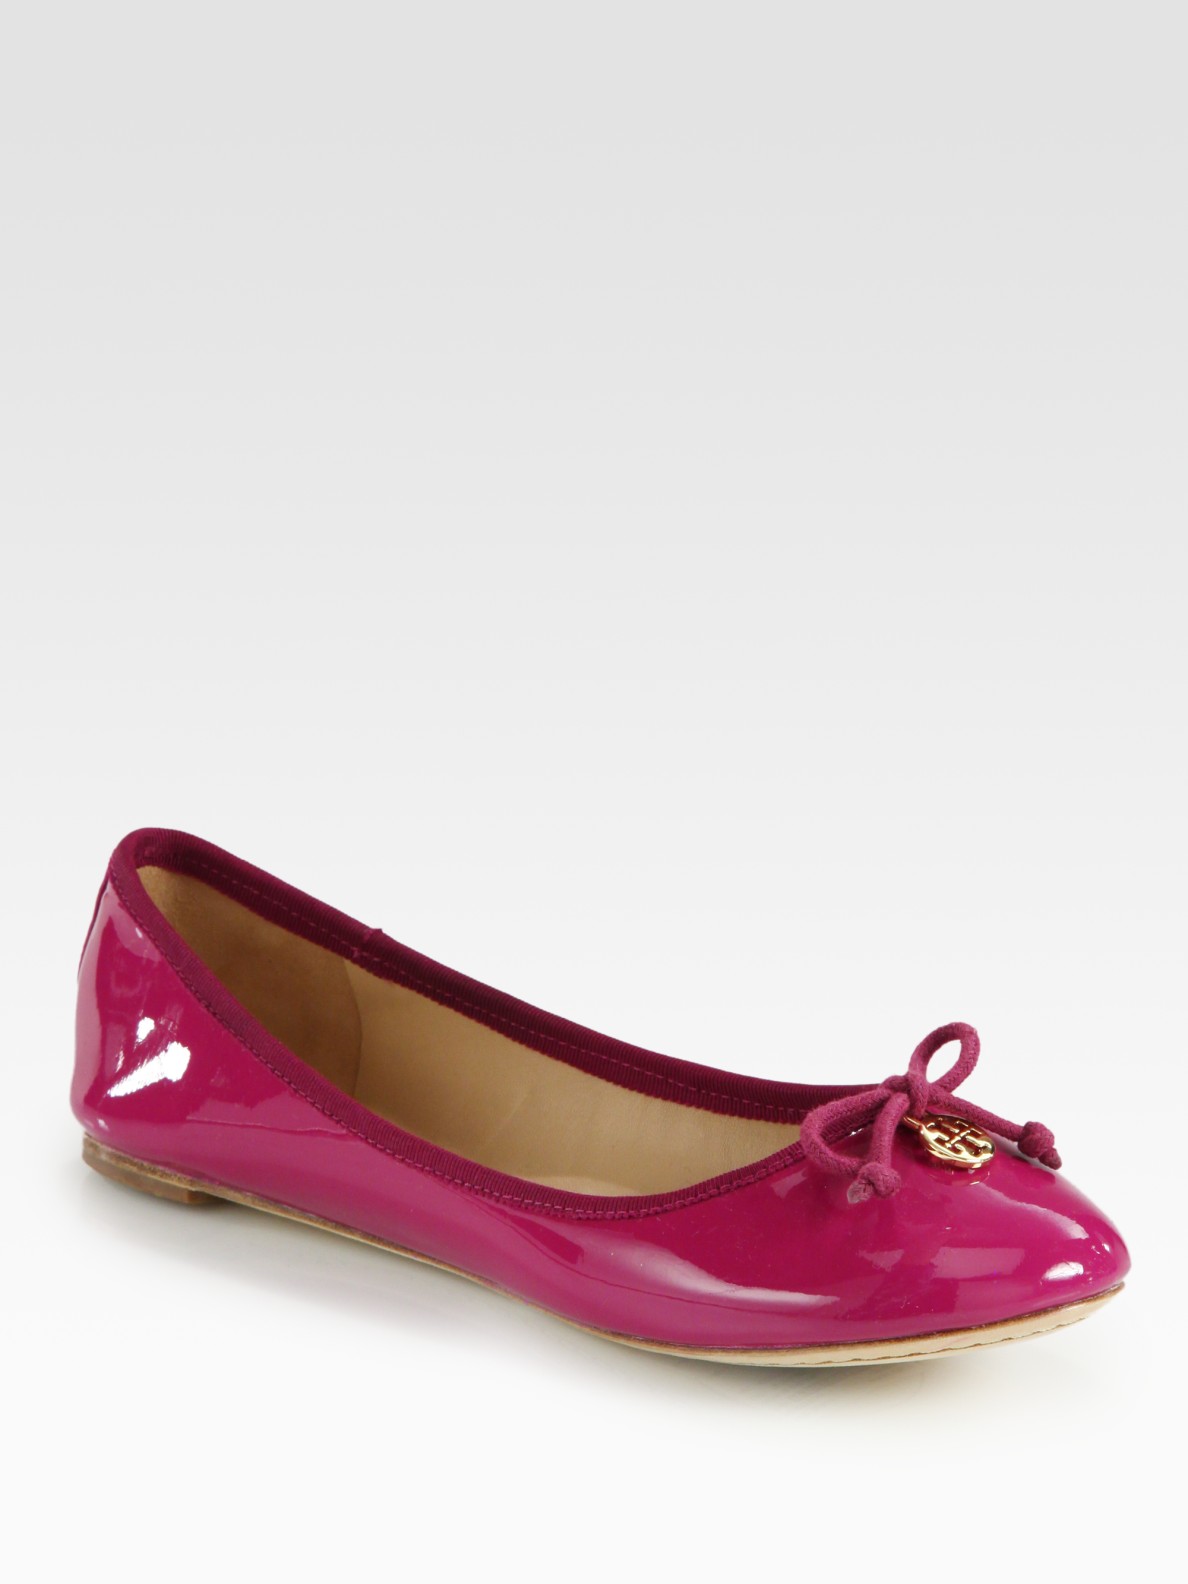 Tory Burch Chelsea Patent Leather Ballet Flats in Purple (fuchsia) | Lyst